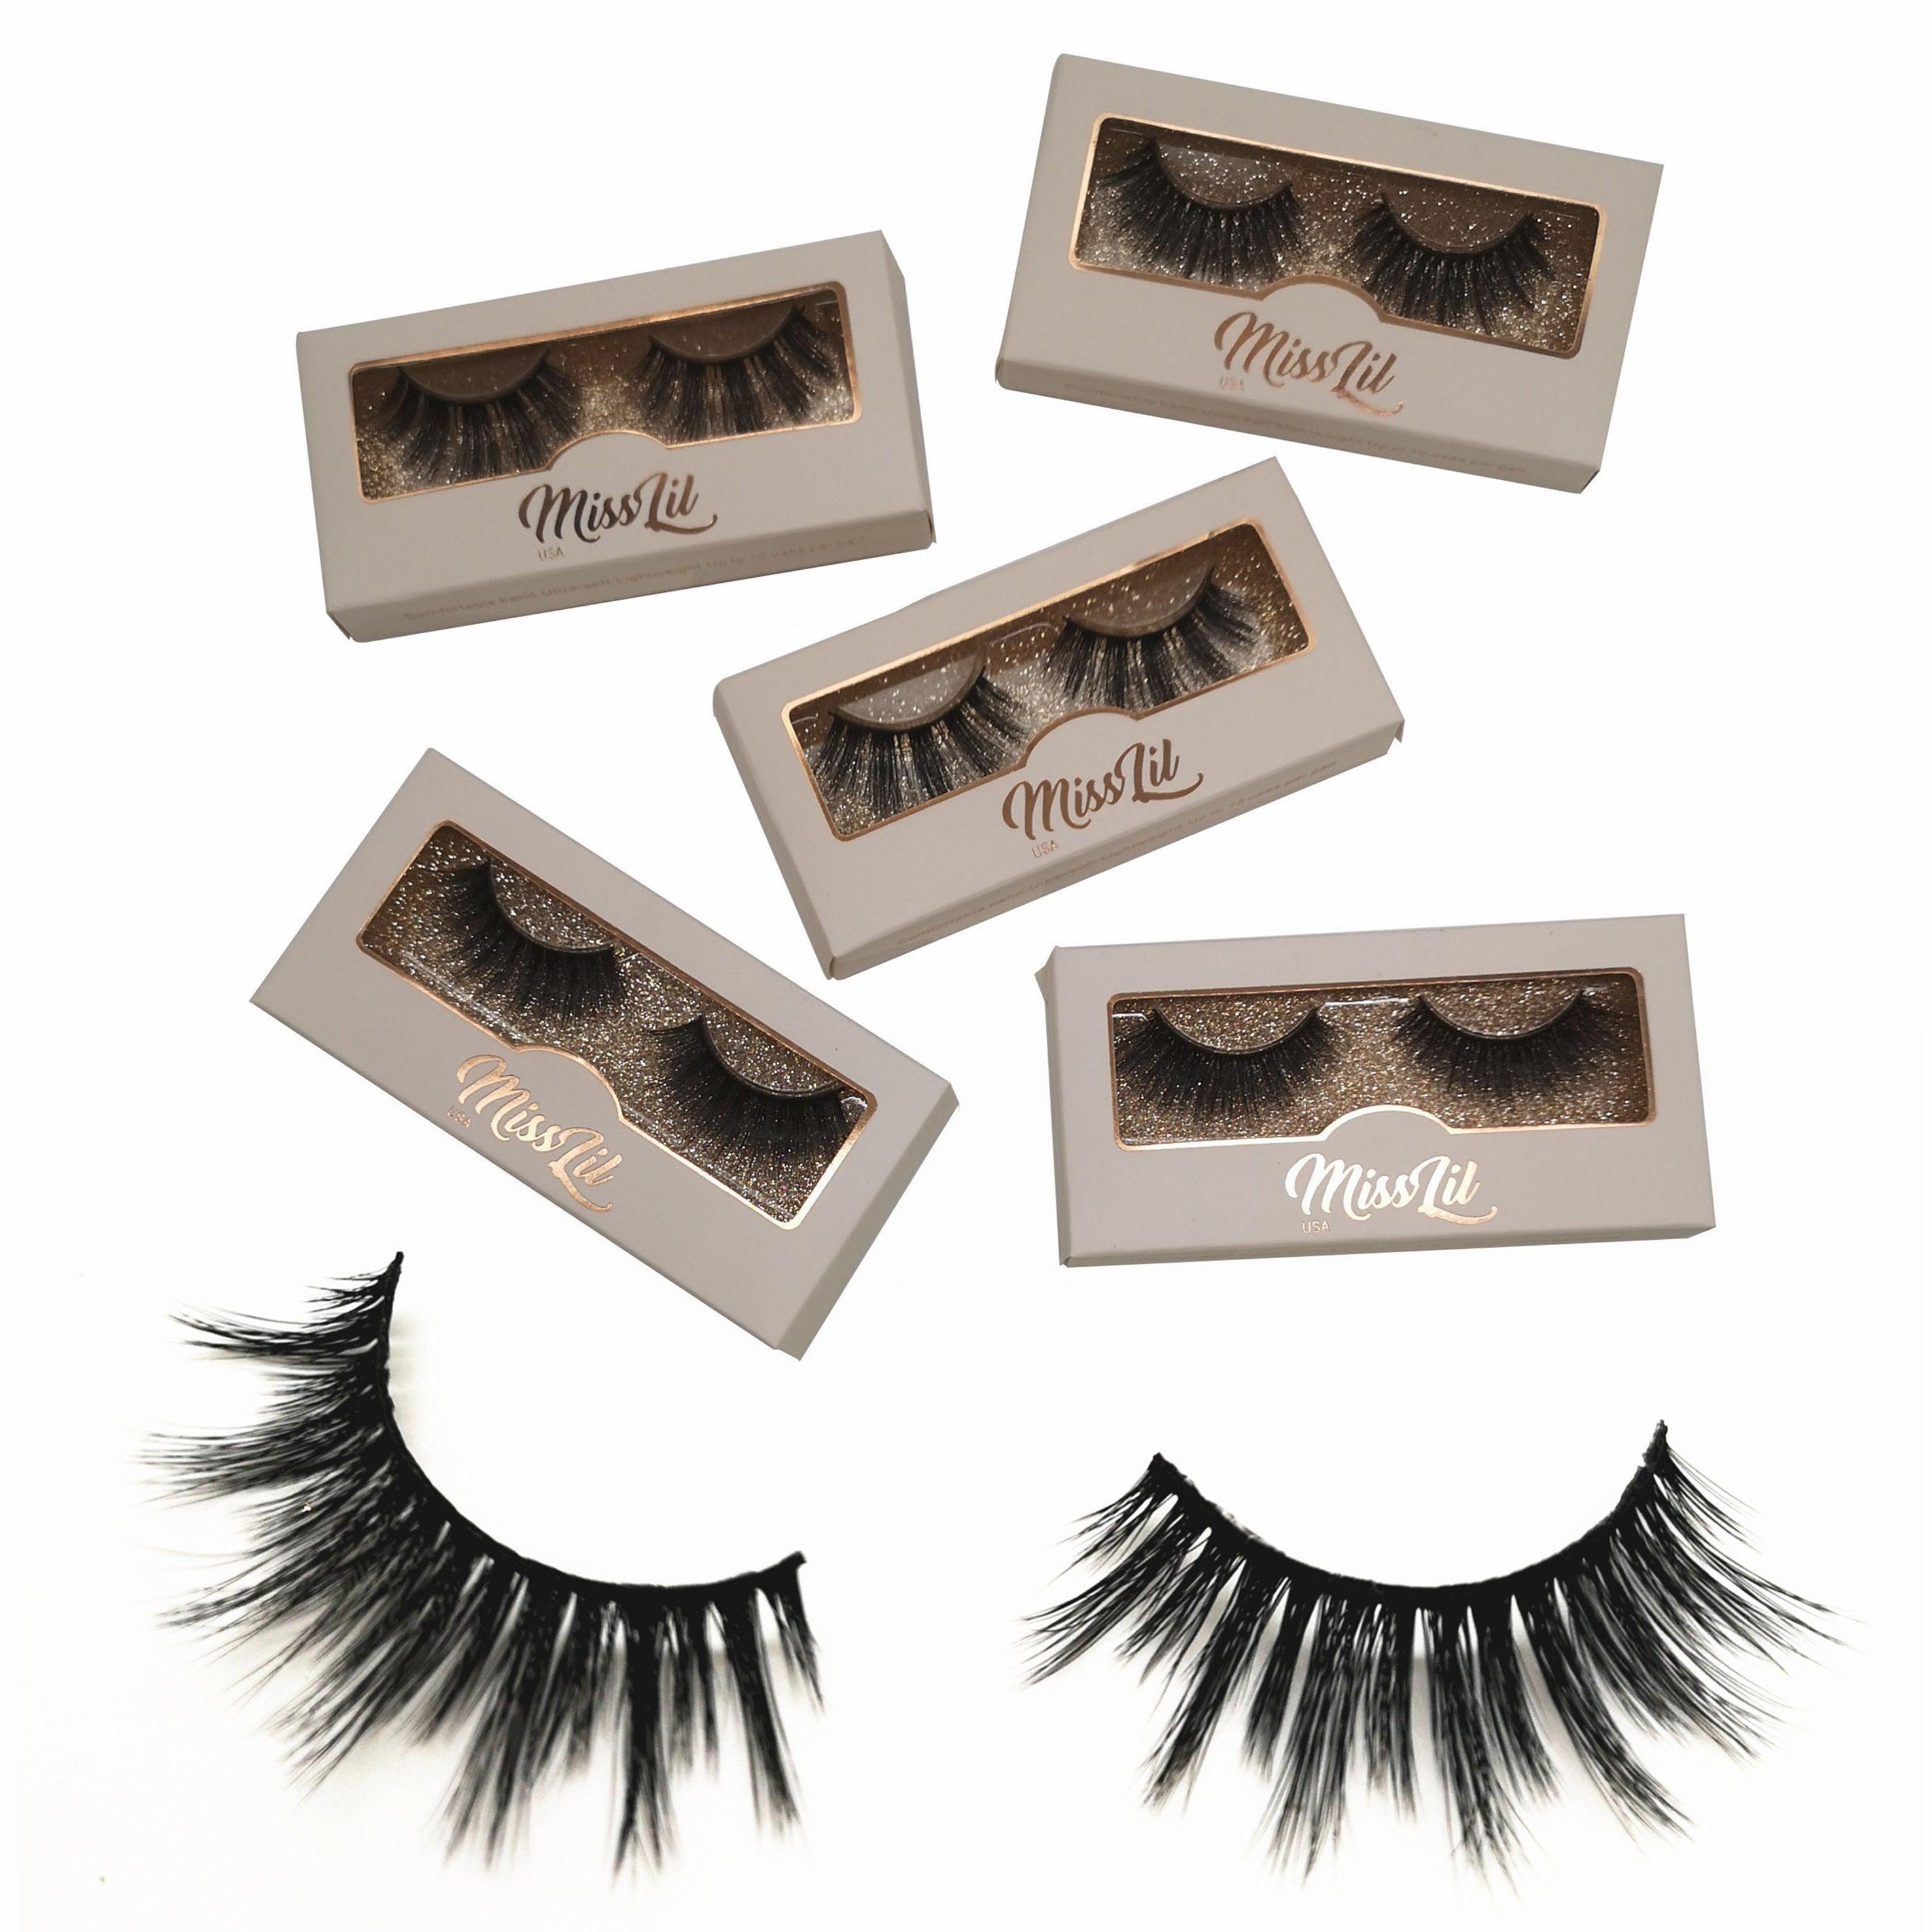 1 Pair Miss Lil USA Lashes #10 (Pack of 12) - Miss Lil USA Wholesale